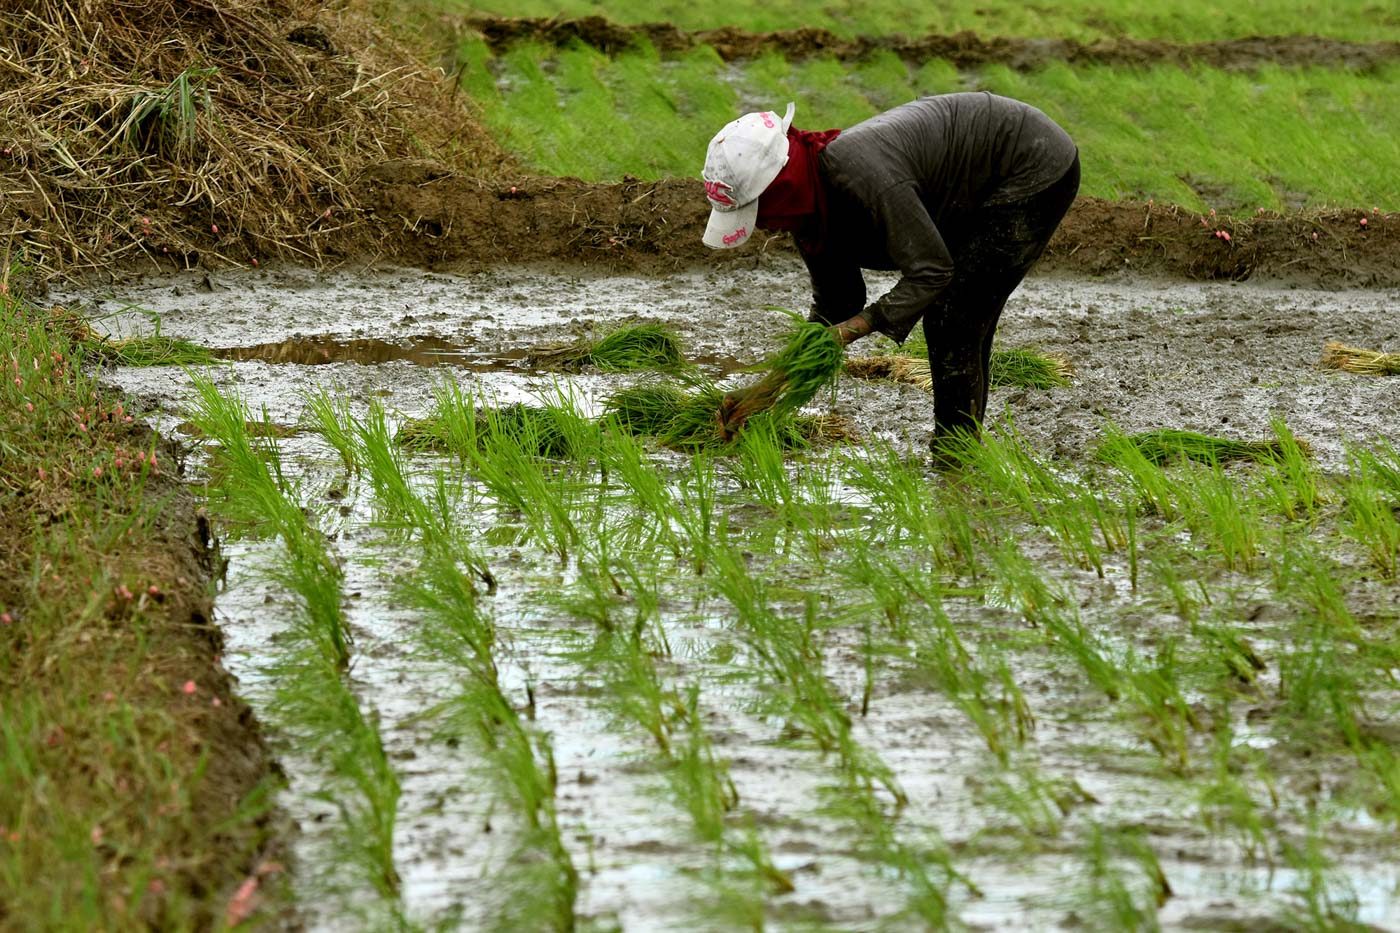 Government to settle for 93% rice self-sufficiency rate